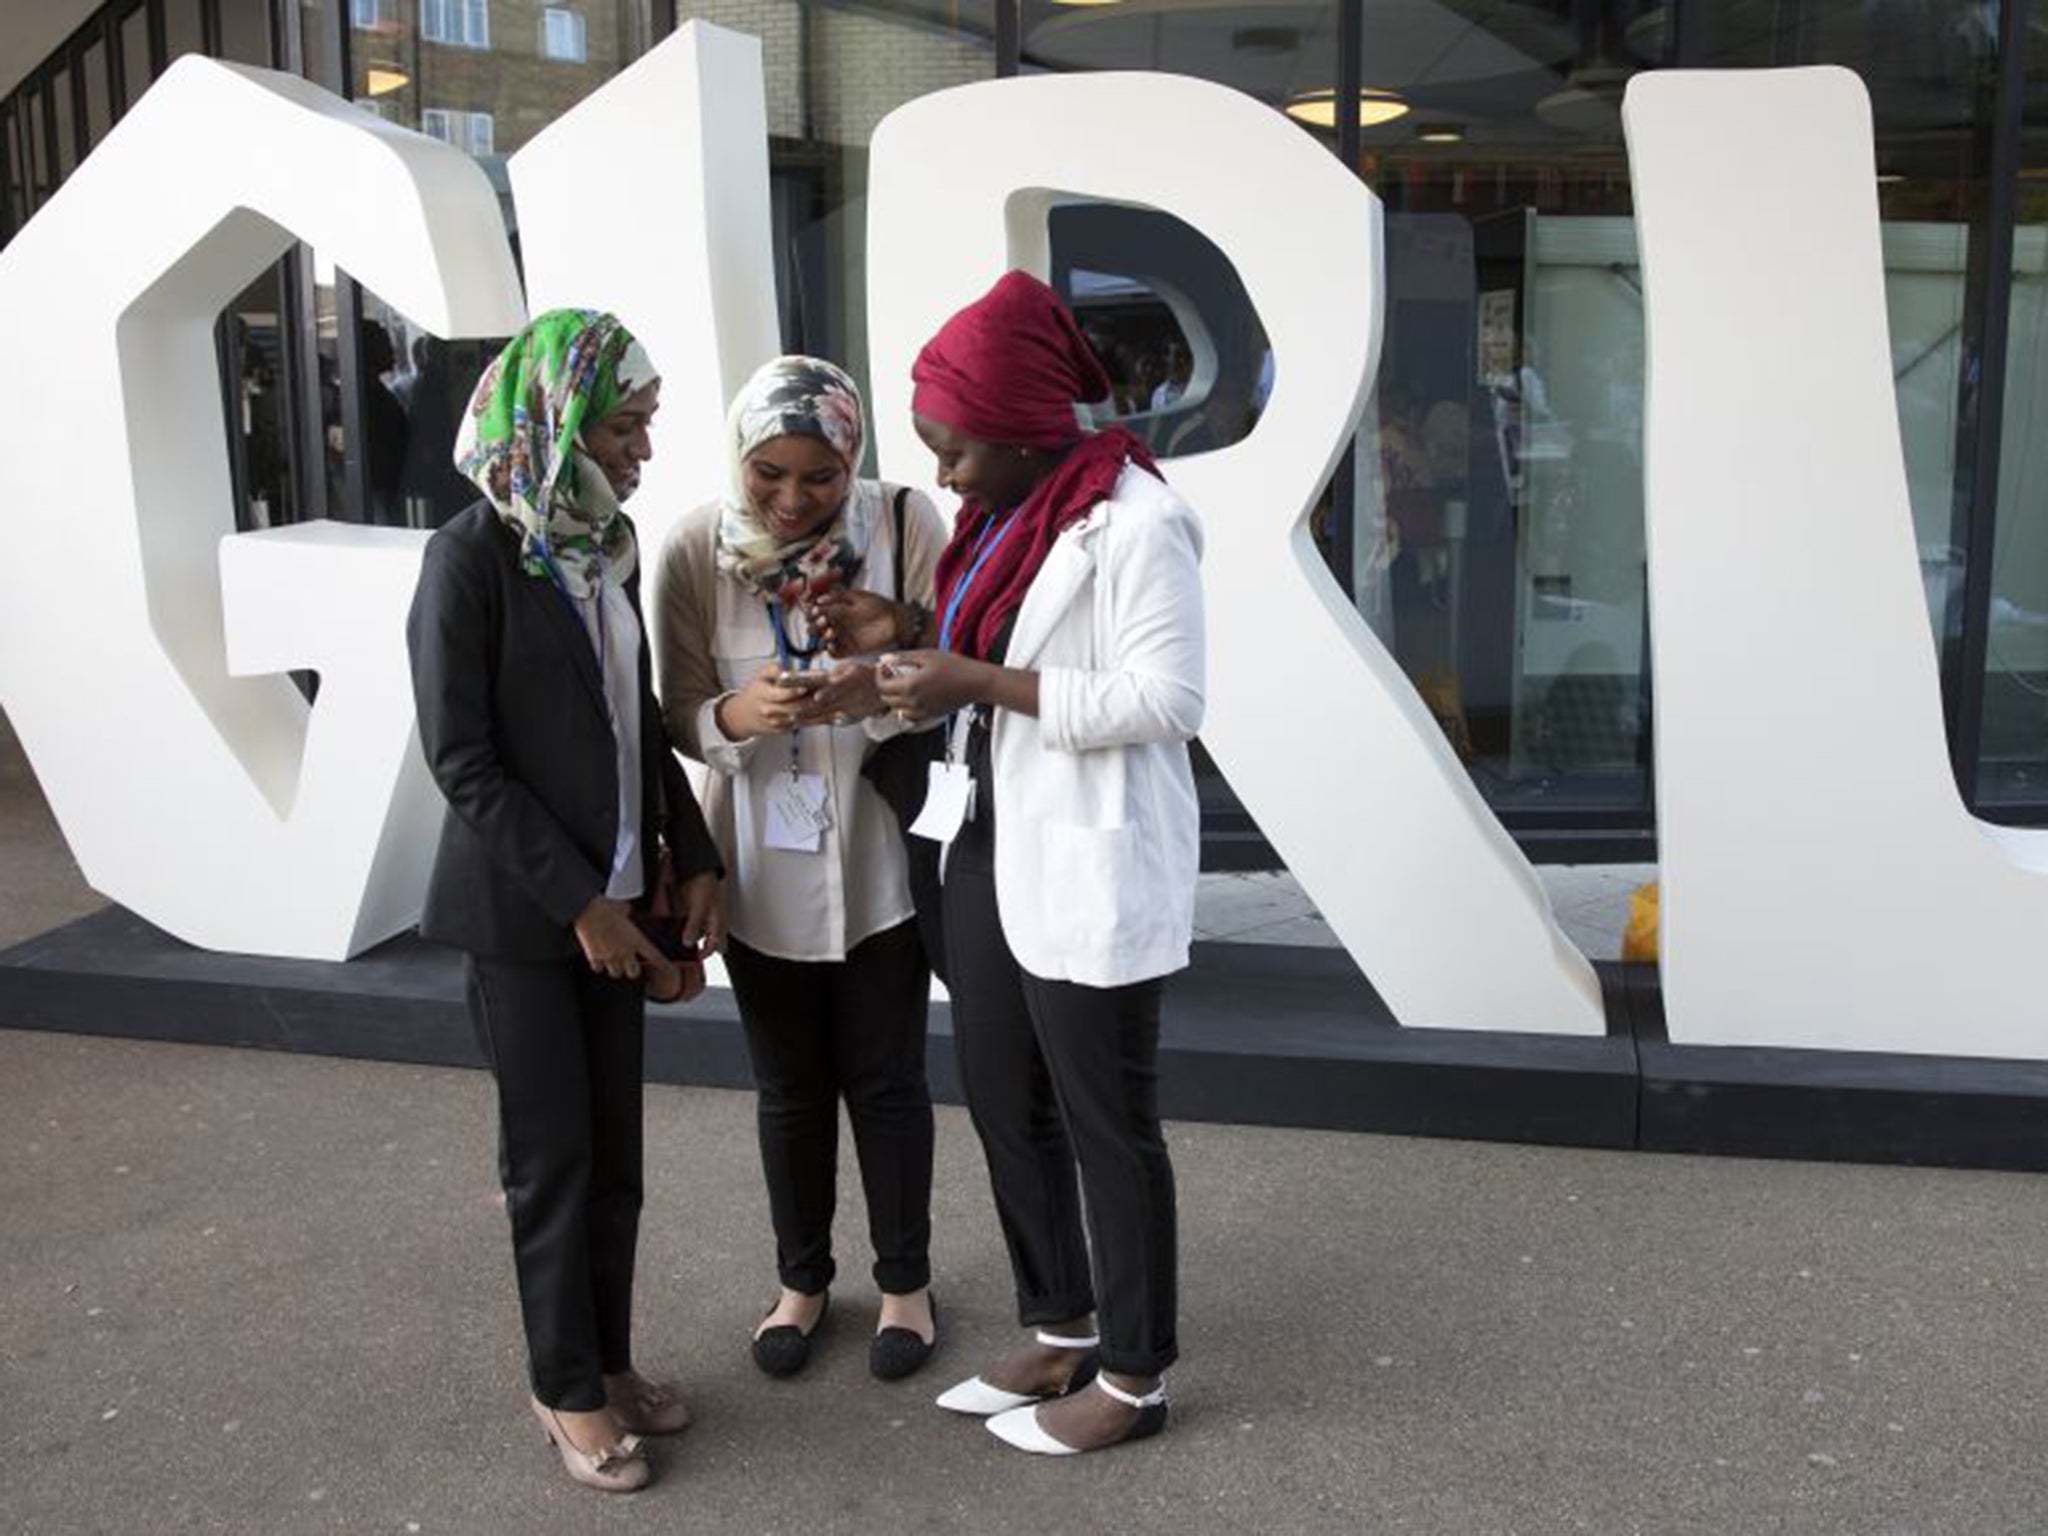 Protected Delegates at last year’s Girl Summit, which targeted FGM